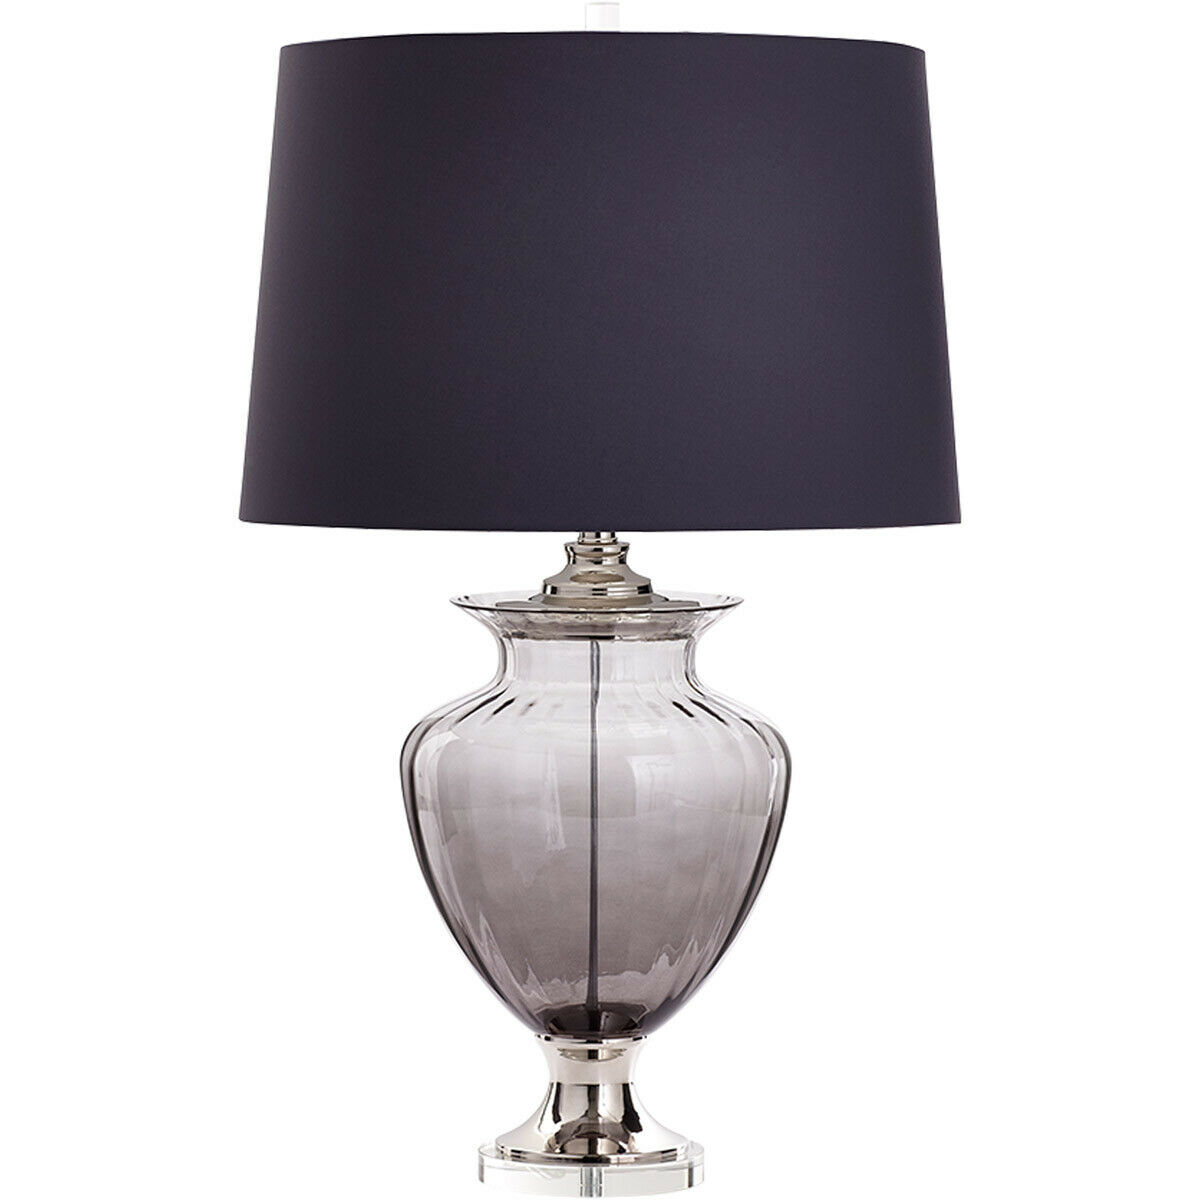 Cyan Design 07753 Open Box Lazara Table Lamp Grey intended for proportions 1200 X 1200